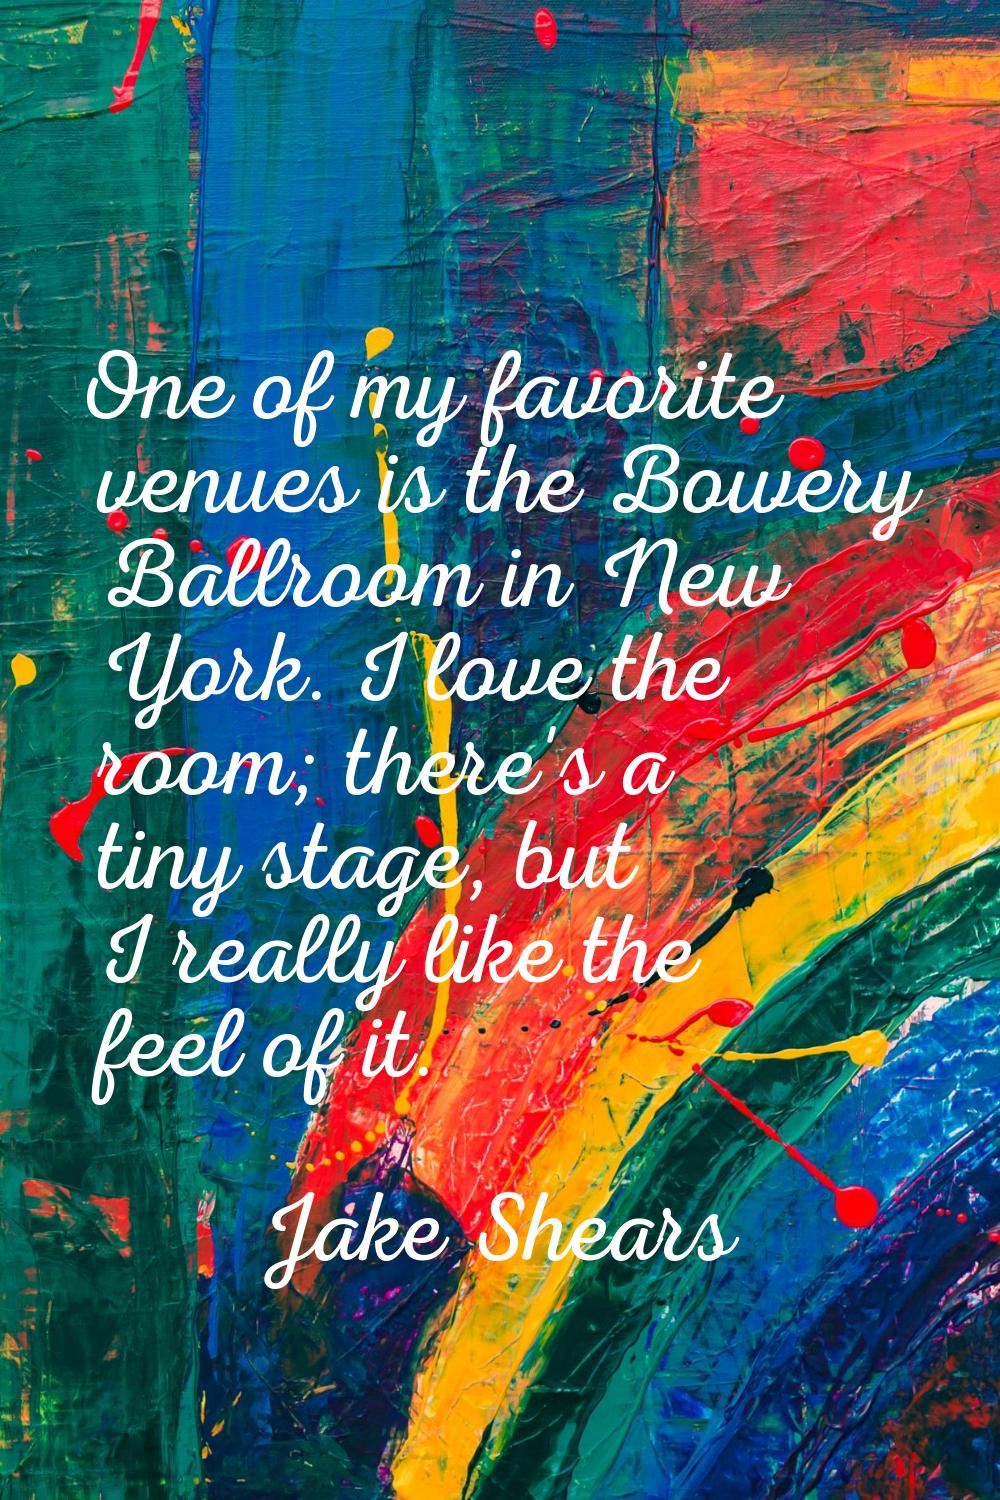 One of my favorite venues is the Bowery Ballroom in New York. I love the room; there's a tiny stage